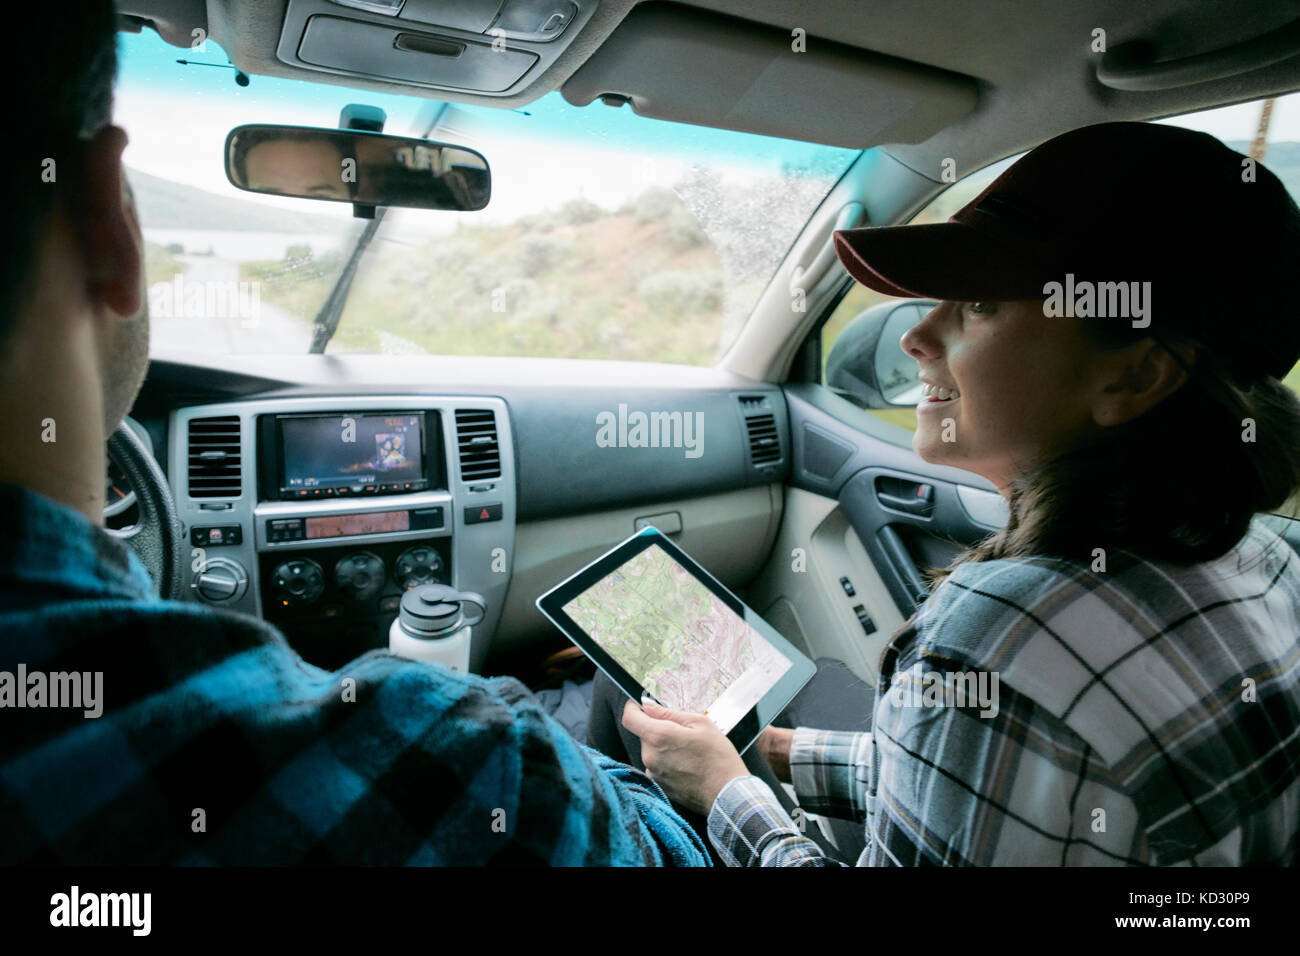 Couple in car, woman holding digital tablet with map showing Stock Photo